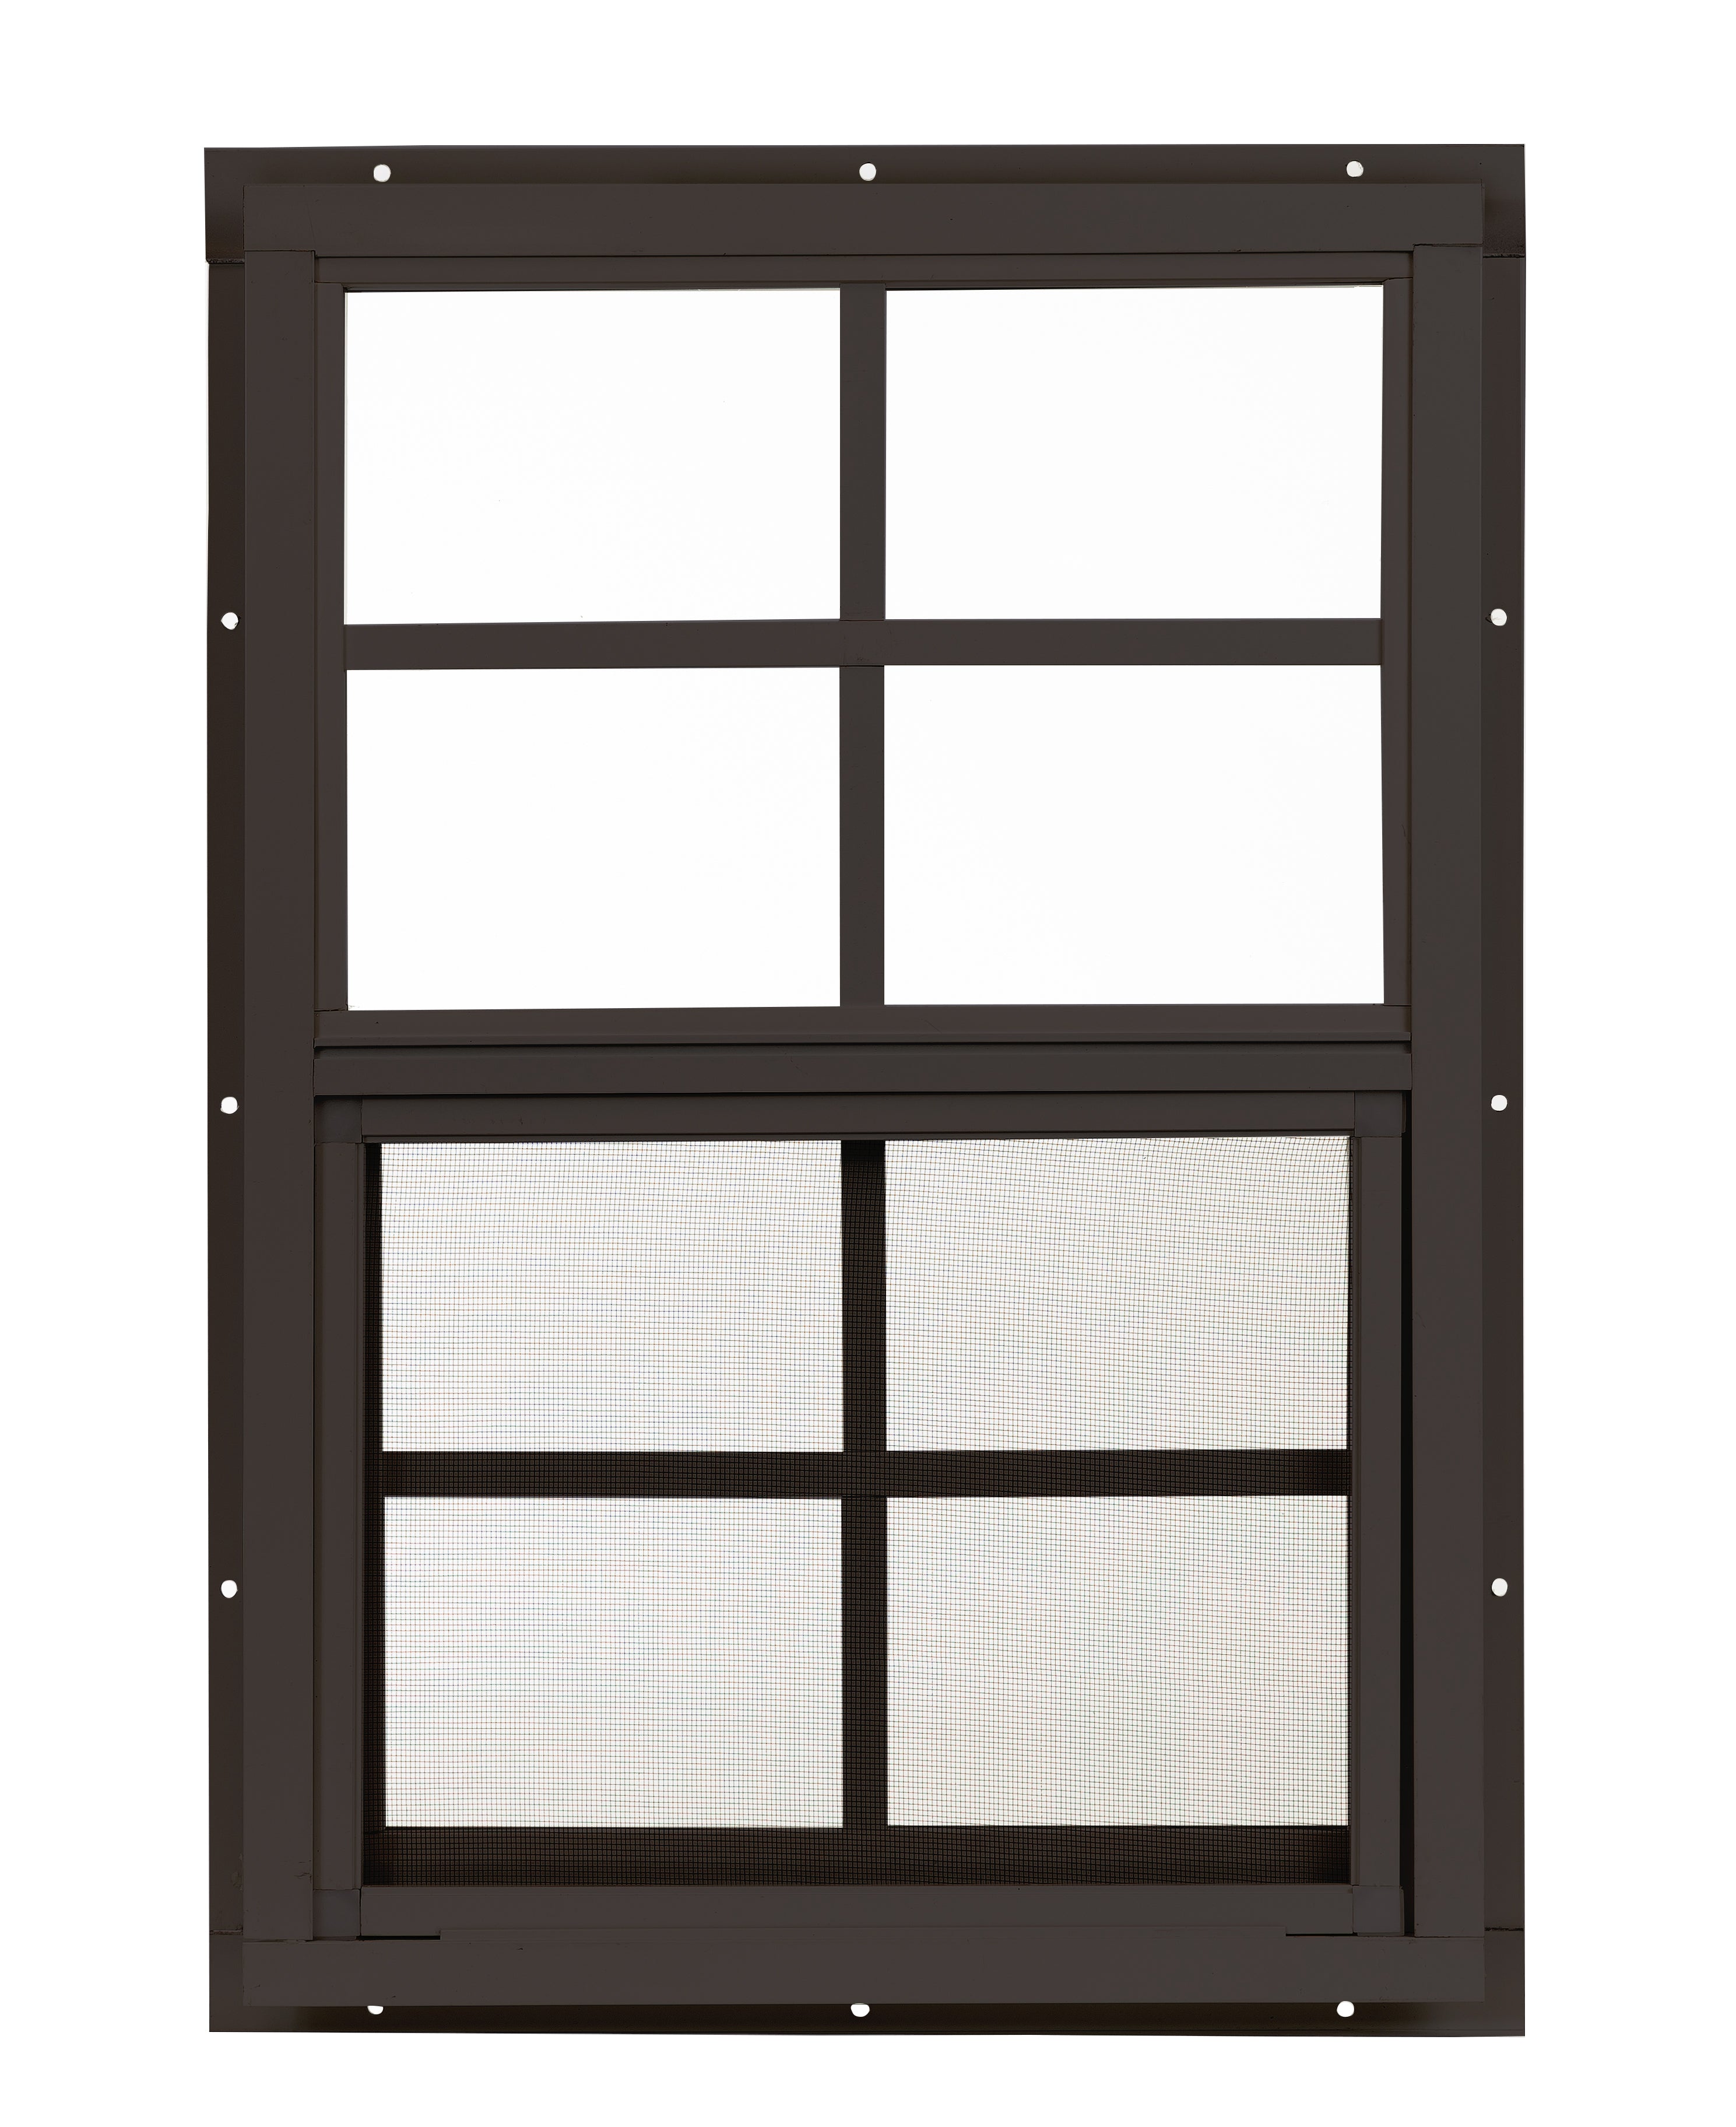 14" W x 21" H Single Hung Flush Mount Brown Window  with Grids for Sheds, Playhouses, and MORE